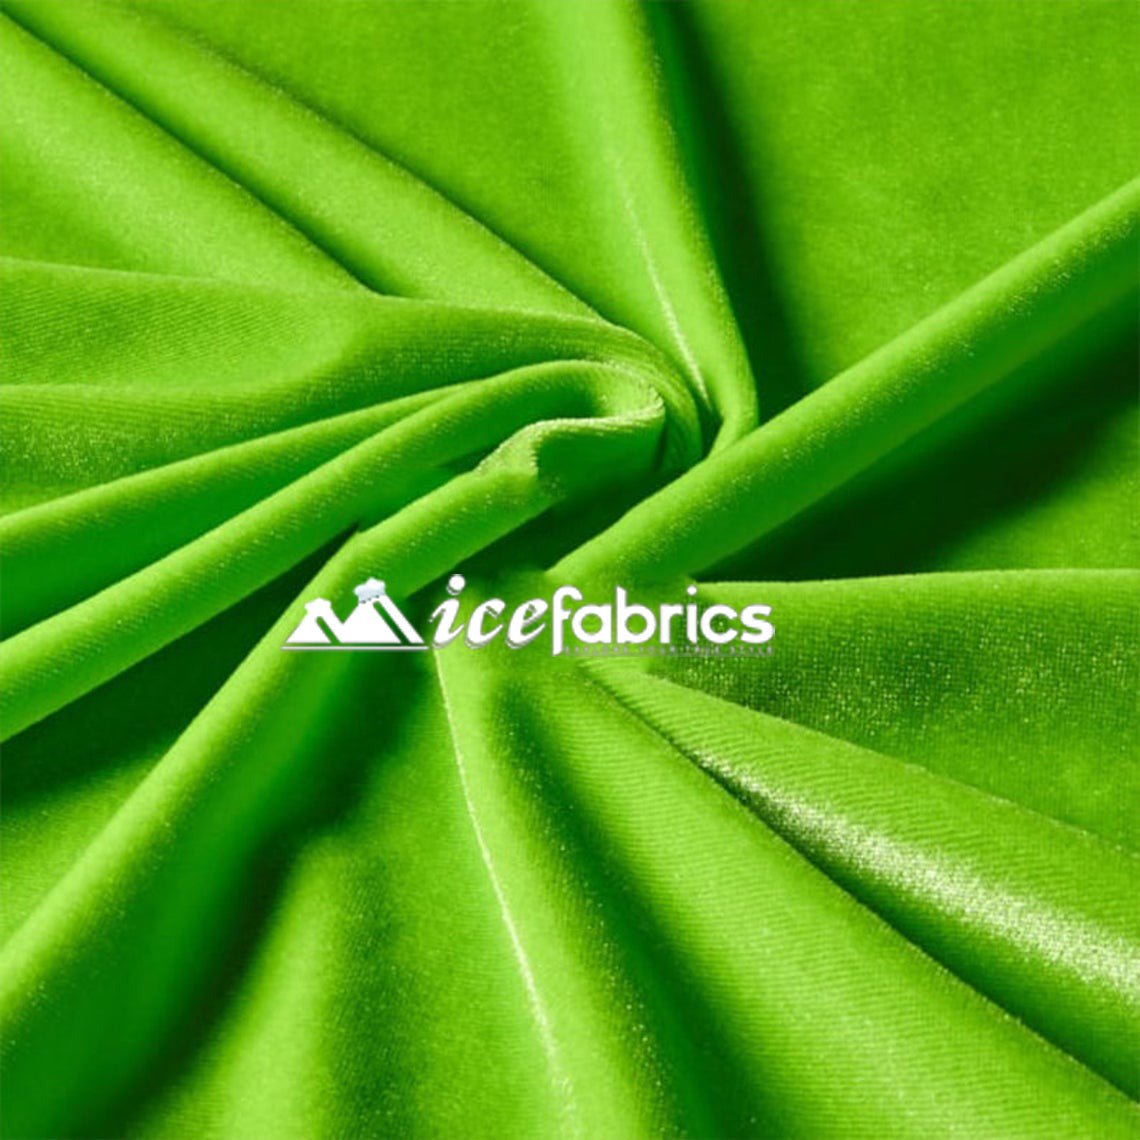 Lime Velvet Fabric By The Yard | 4 Way StretchVelvet FabricICE FABRICSICE FABRICSBy The Yard (58" Wide)Lime Velvet Fabric By The Yard | 4 Way Stretch ICE FABRICS